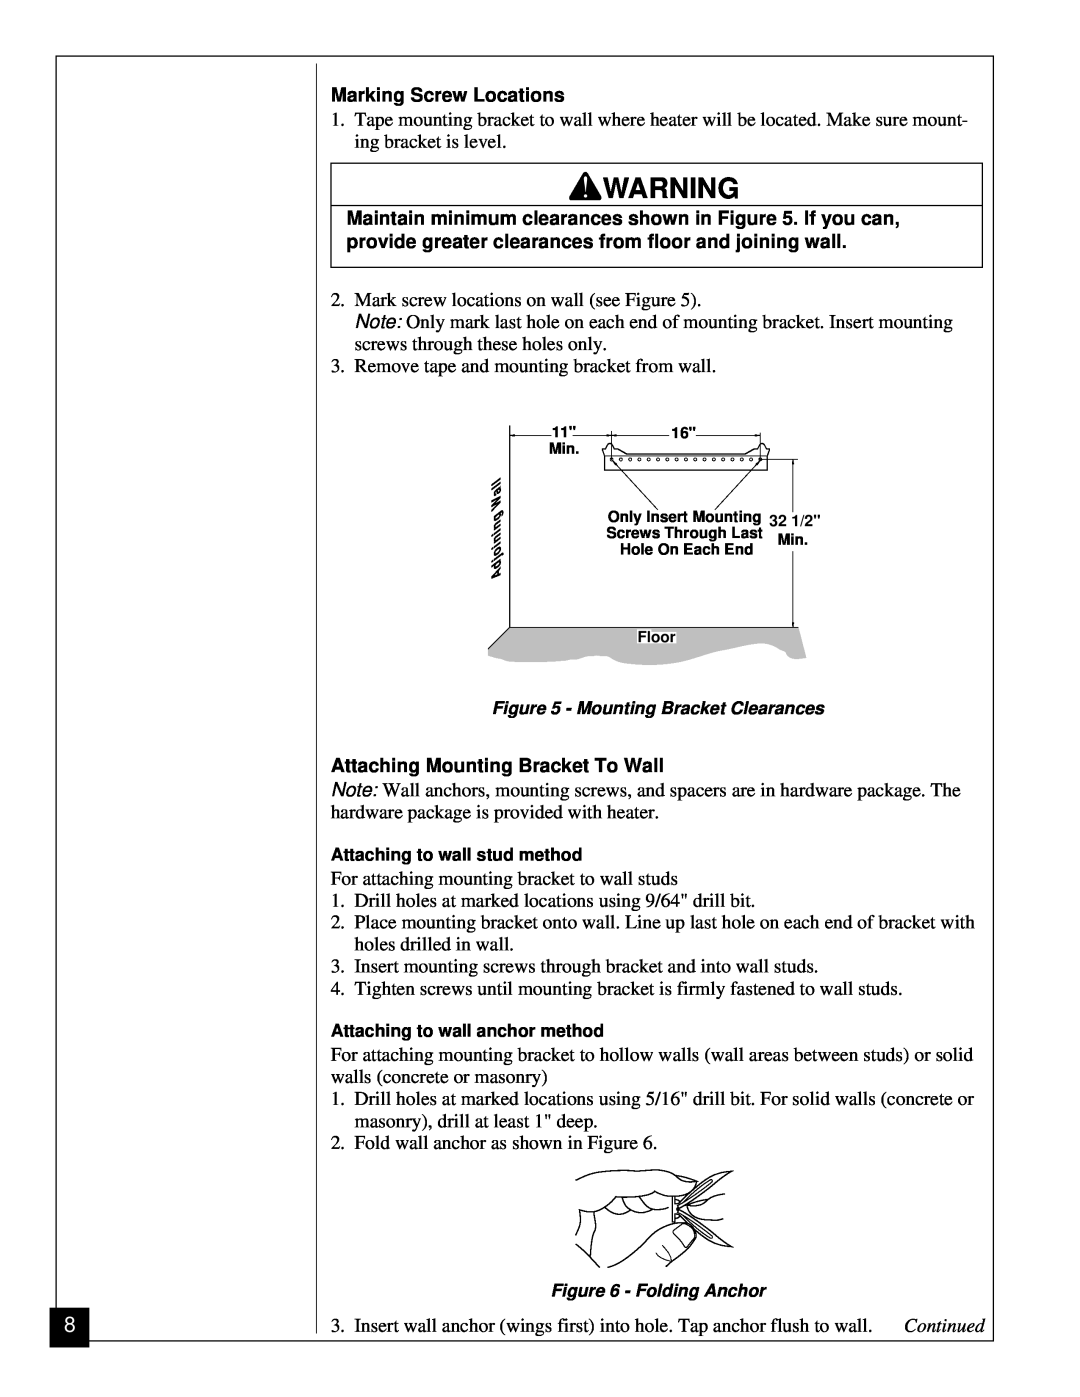 Vanguard Heating VGN30 installation manual Marking Screw Locations, Attaching Mounting Bracket To Wall 